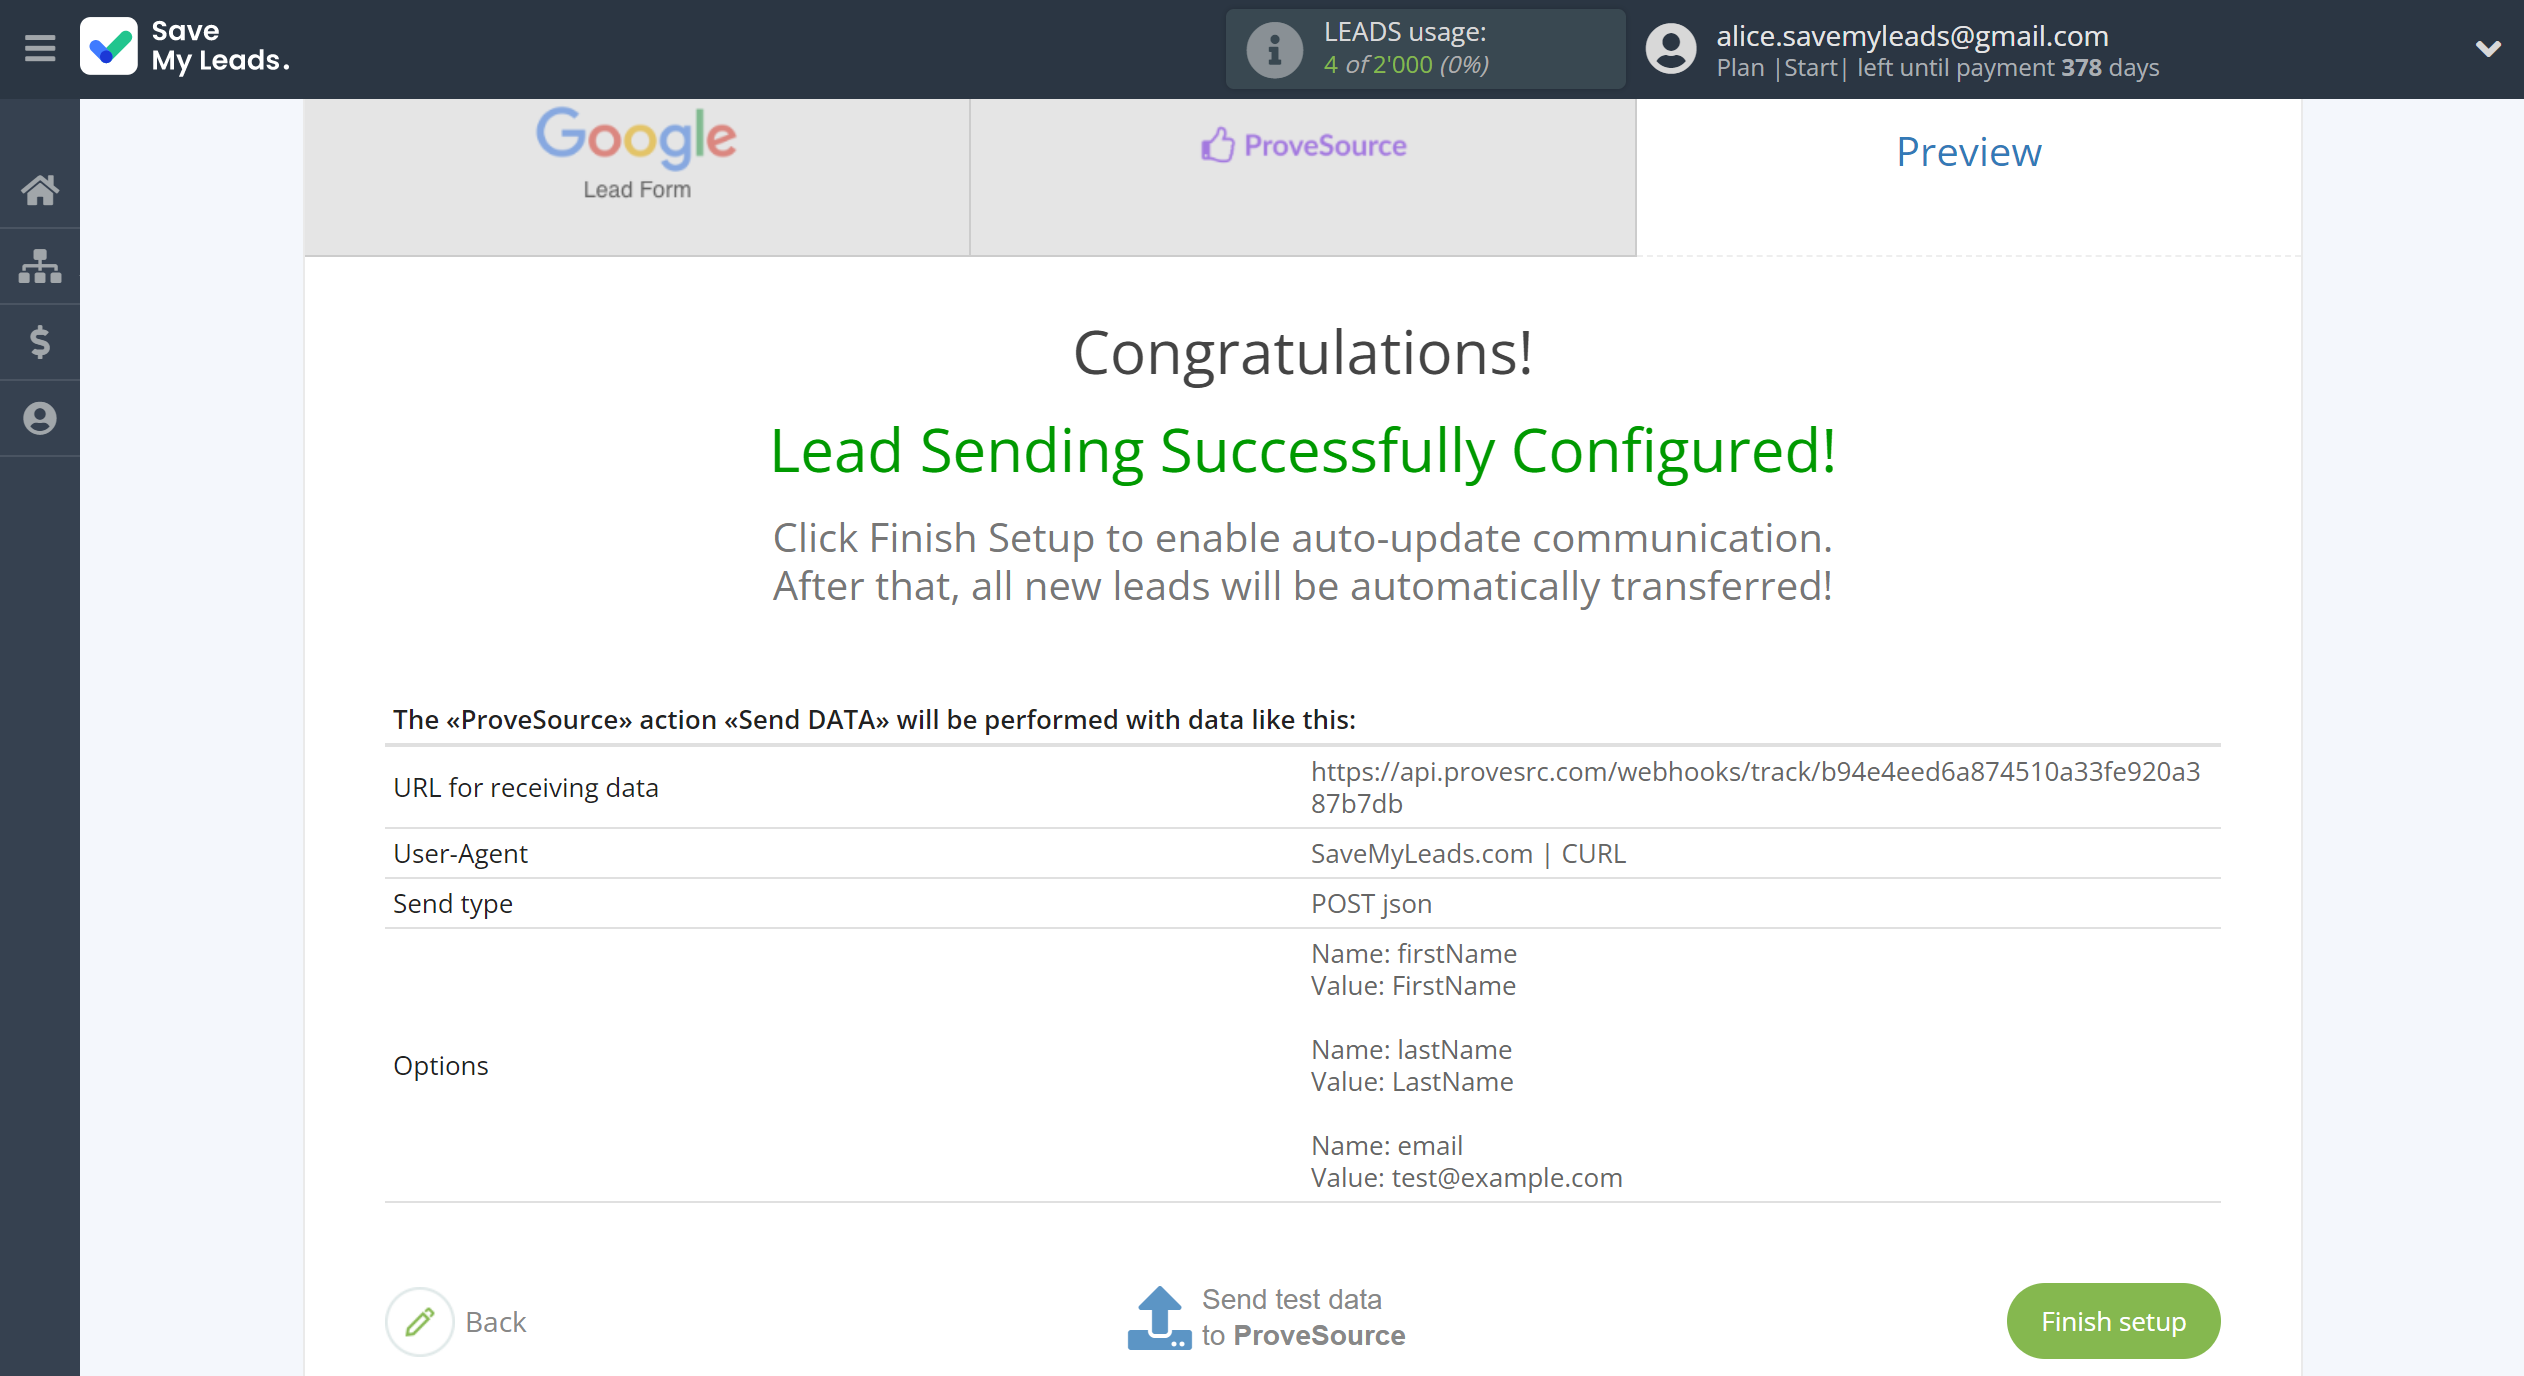 How to Connect Google Lead Form with ProveSource | Test data